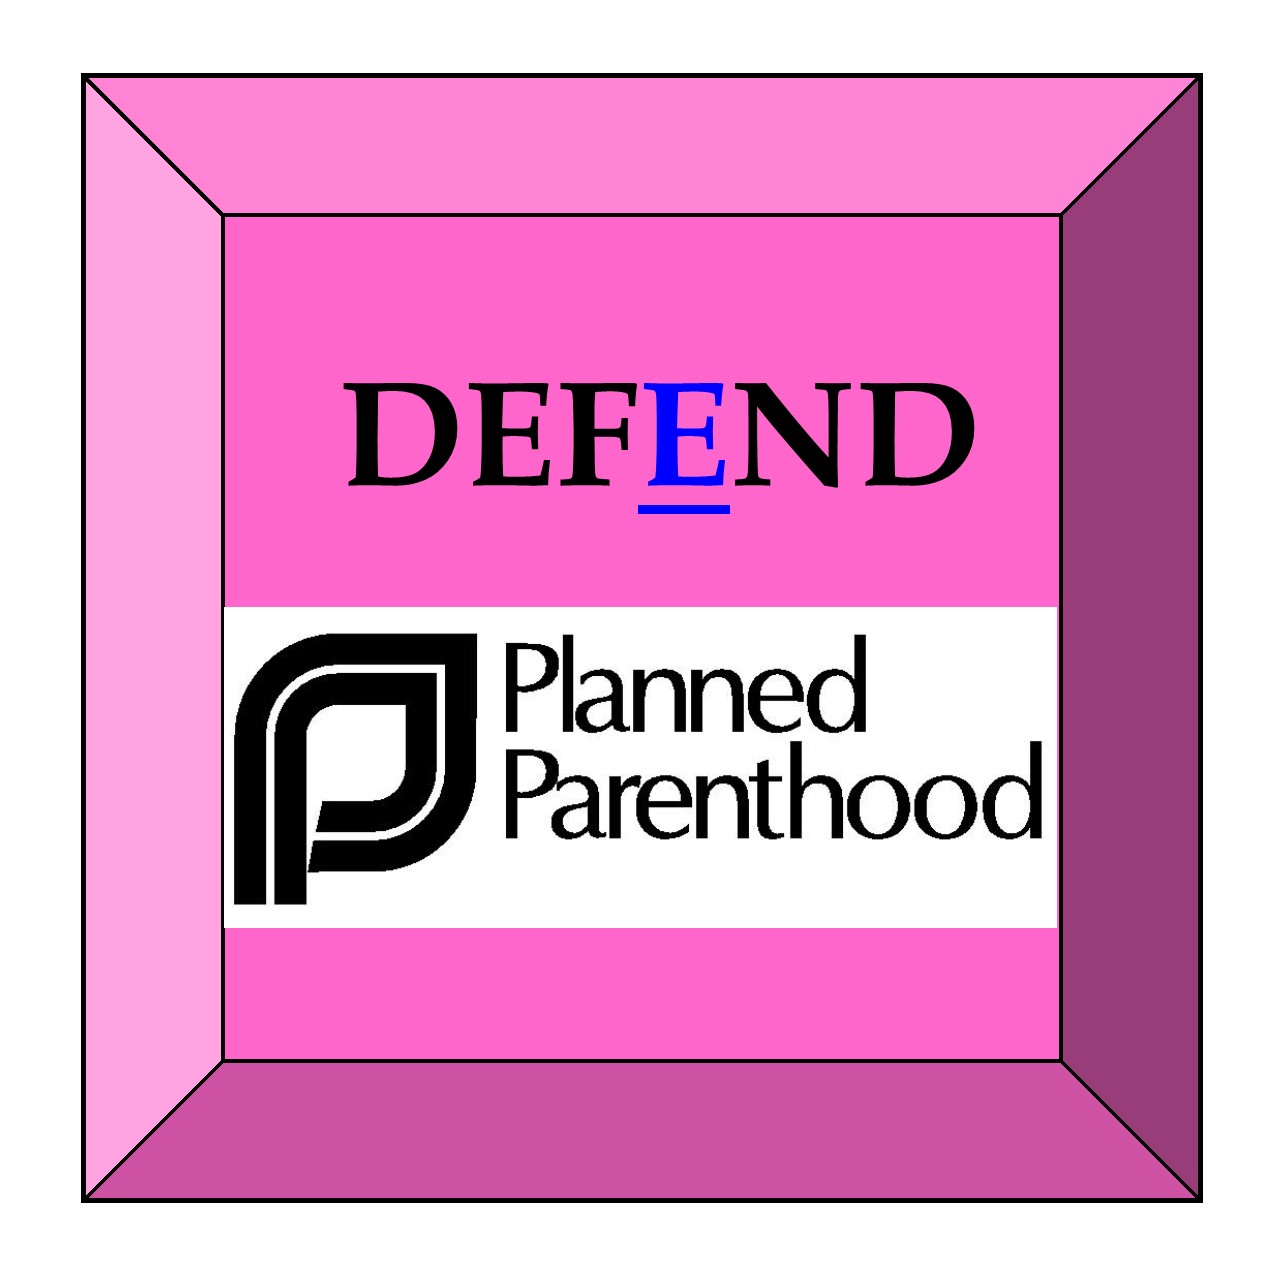 For Women's Equality Day, let's defend women's health | Letters from the Left1275 x 1275